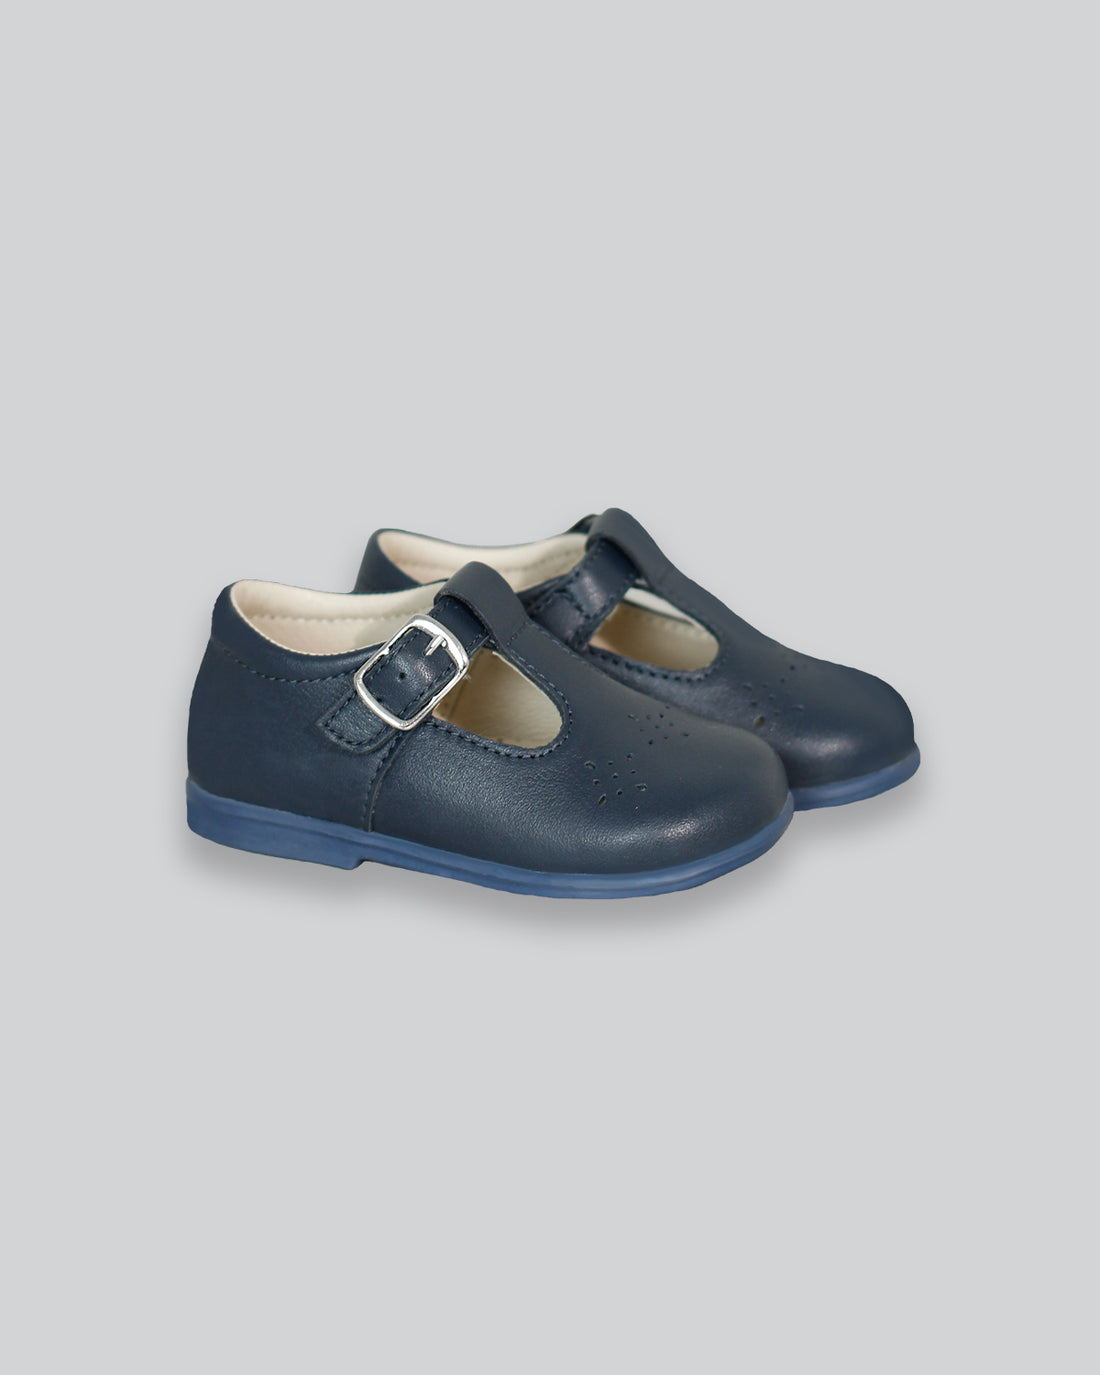 Cardiff Shoes in Marine Blue